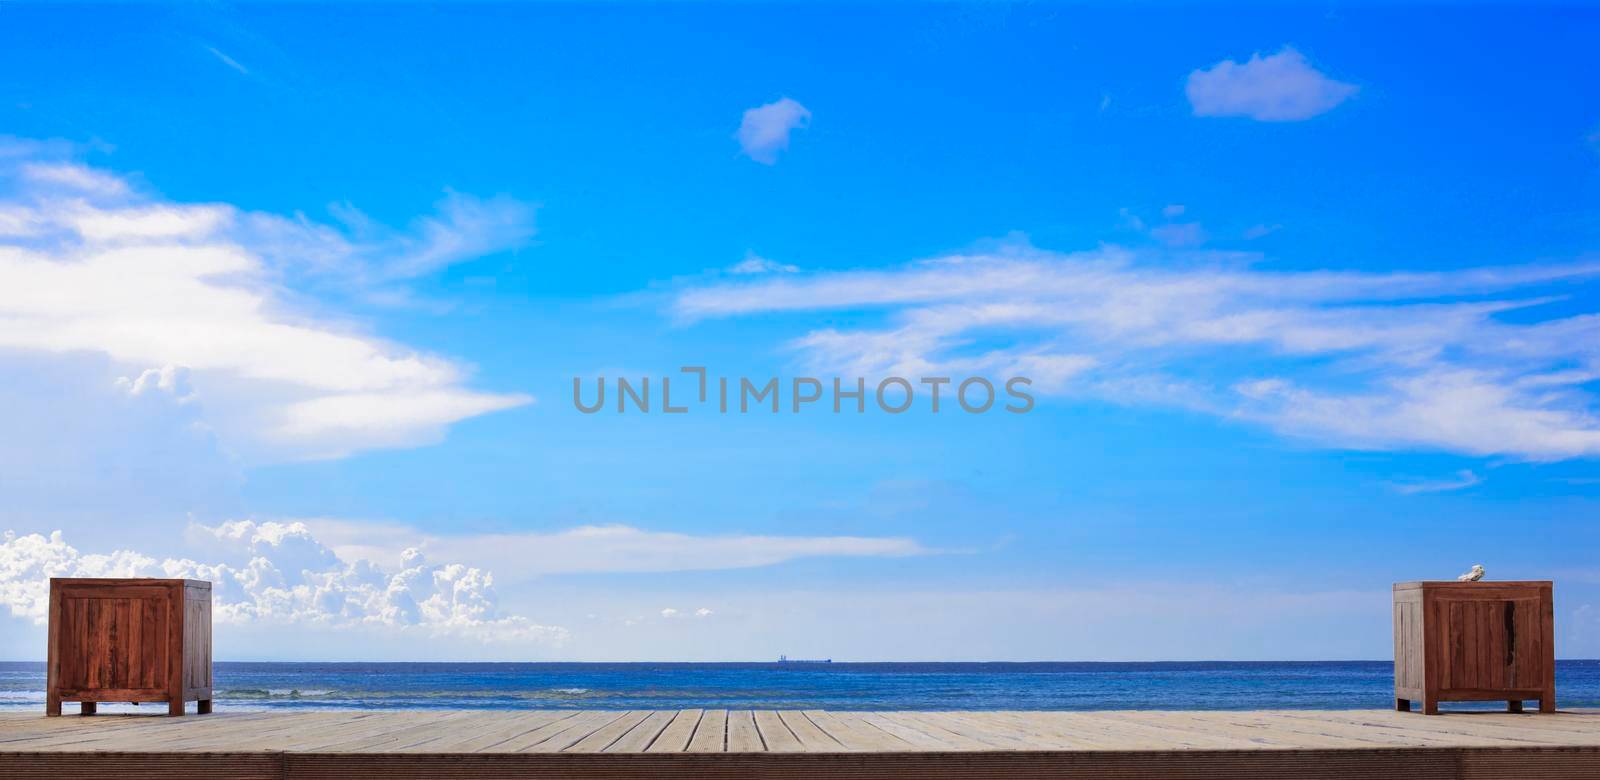 Empty wooden pier and beach. Desk space and sky background for product display montage. by Jyliana